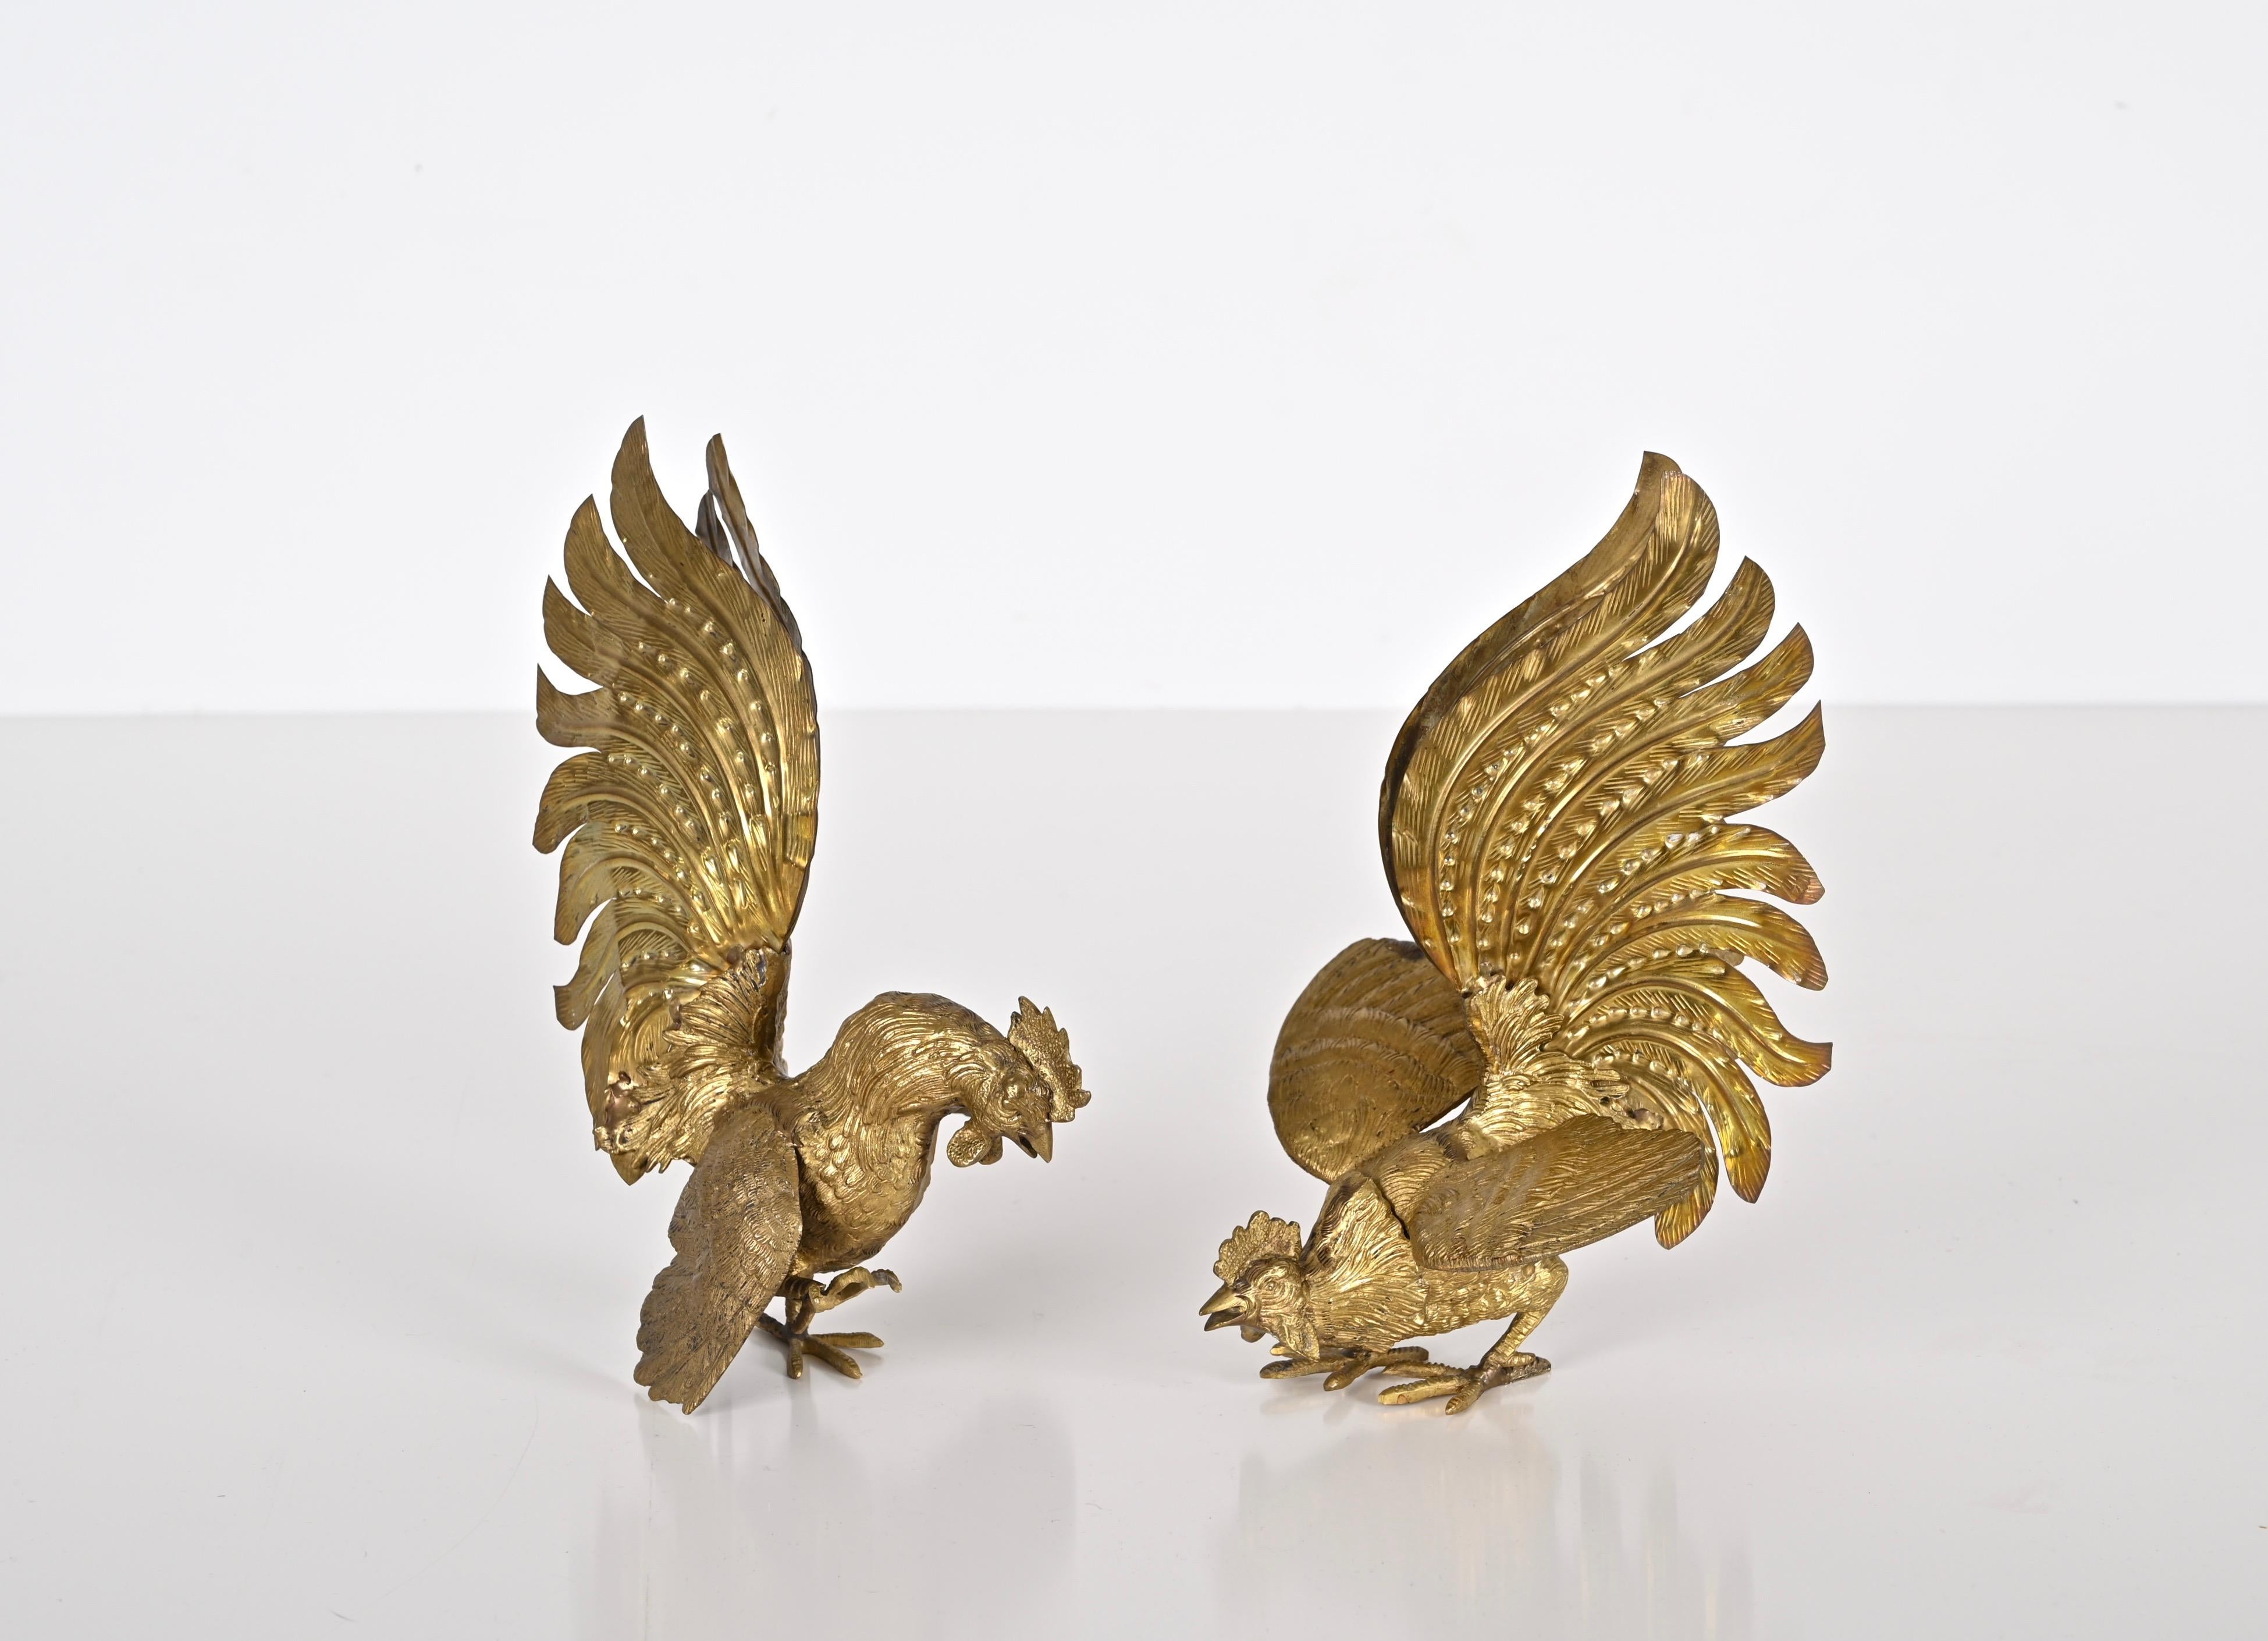 Stunning pair of gold plated fighting cockerel ornaments. These beautiful sculptures were produced in Italy in the 1960s. 

An iconic set from the 1960s that is incredibly rare to be found gold plated. These animated roosters hand-crafted